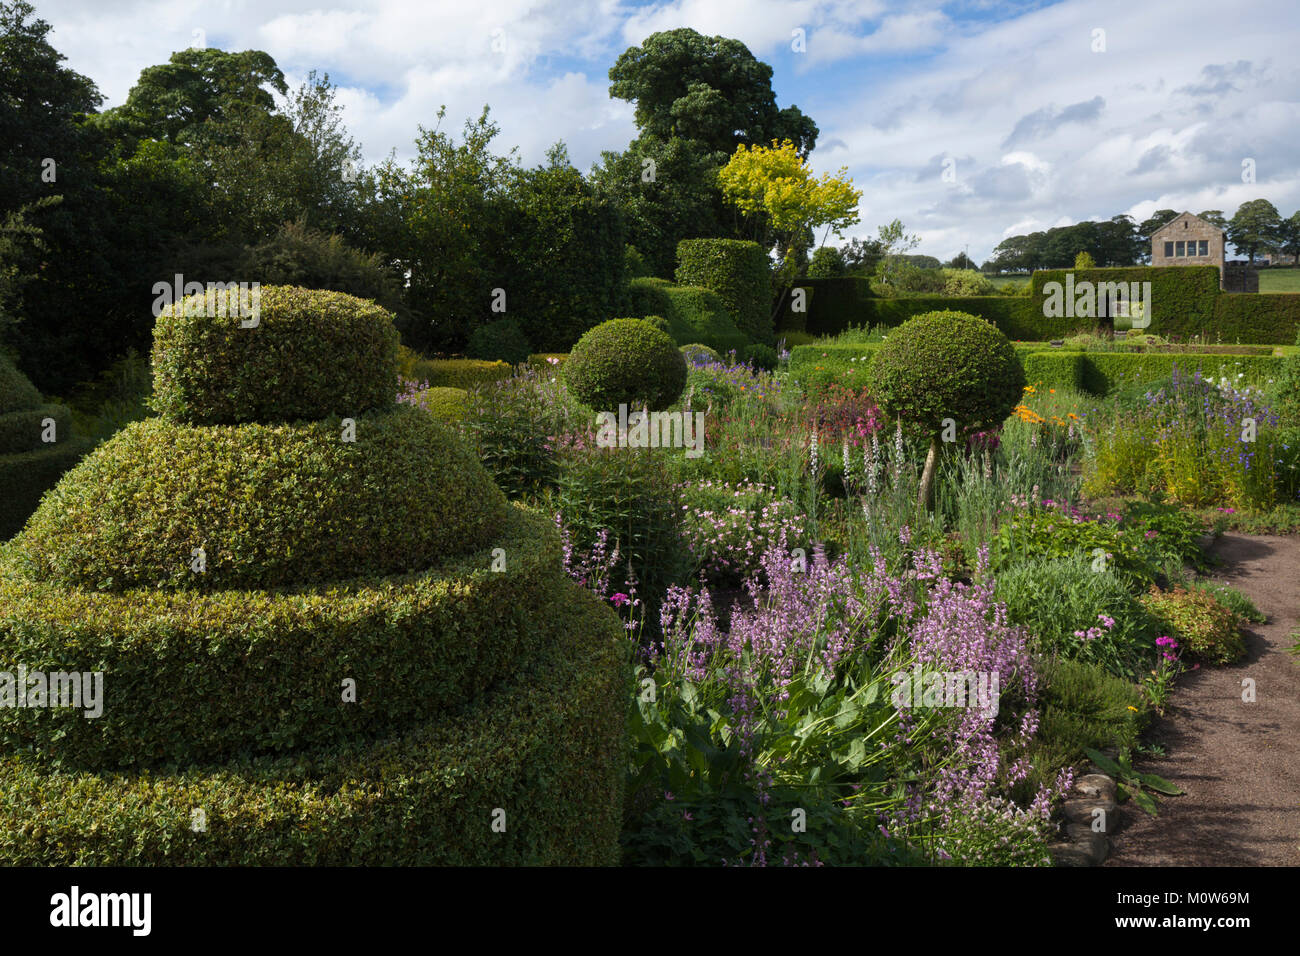 Topiary and colourful herbaceous borders of the Flower Garden with a summerhouse in the background, Herterton House gardens, Northumberland, England Stock Photo